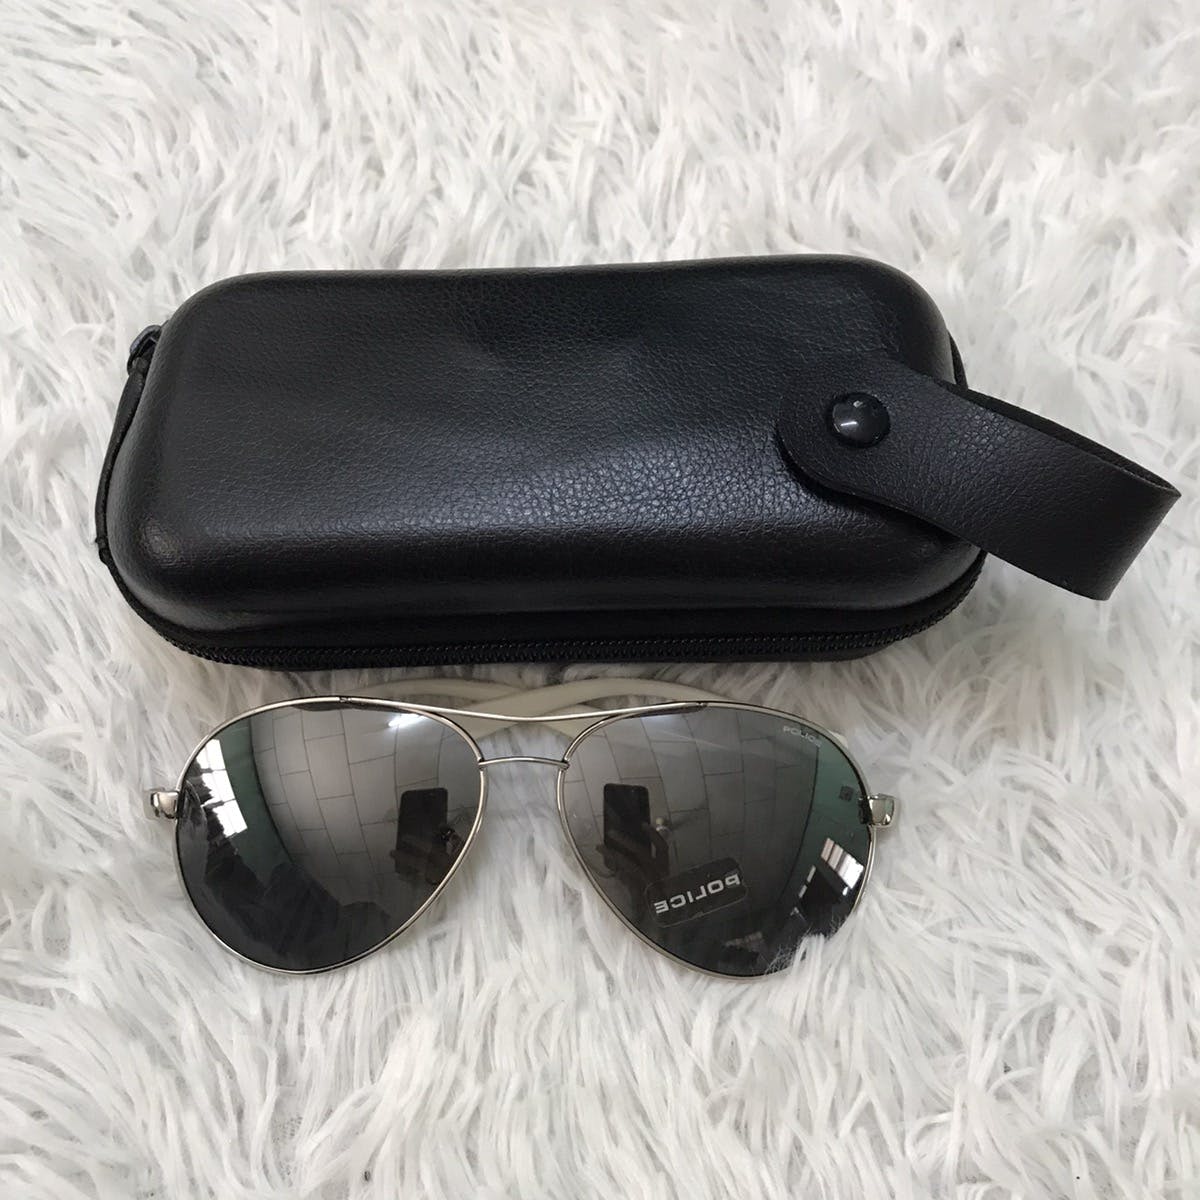 Police sunglass made in Italy - 2